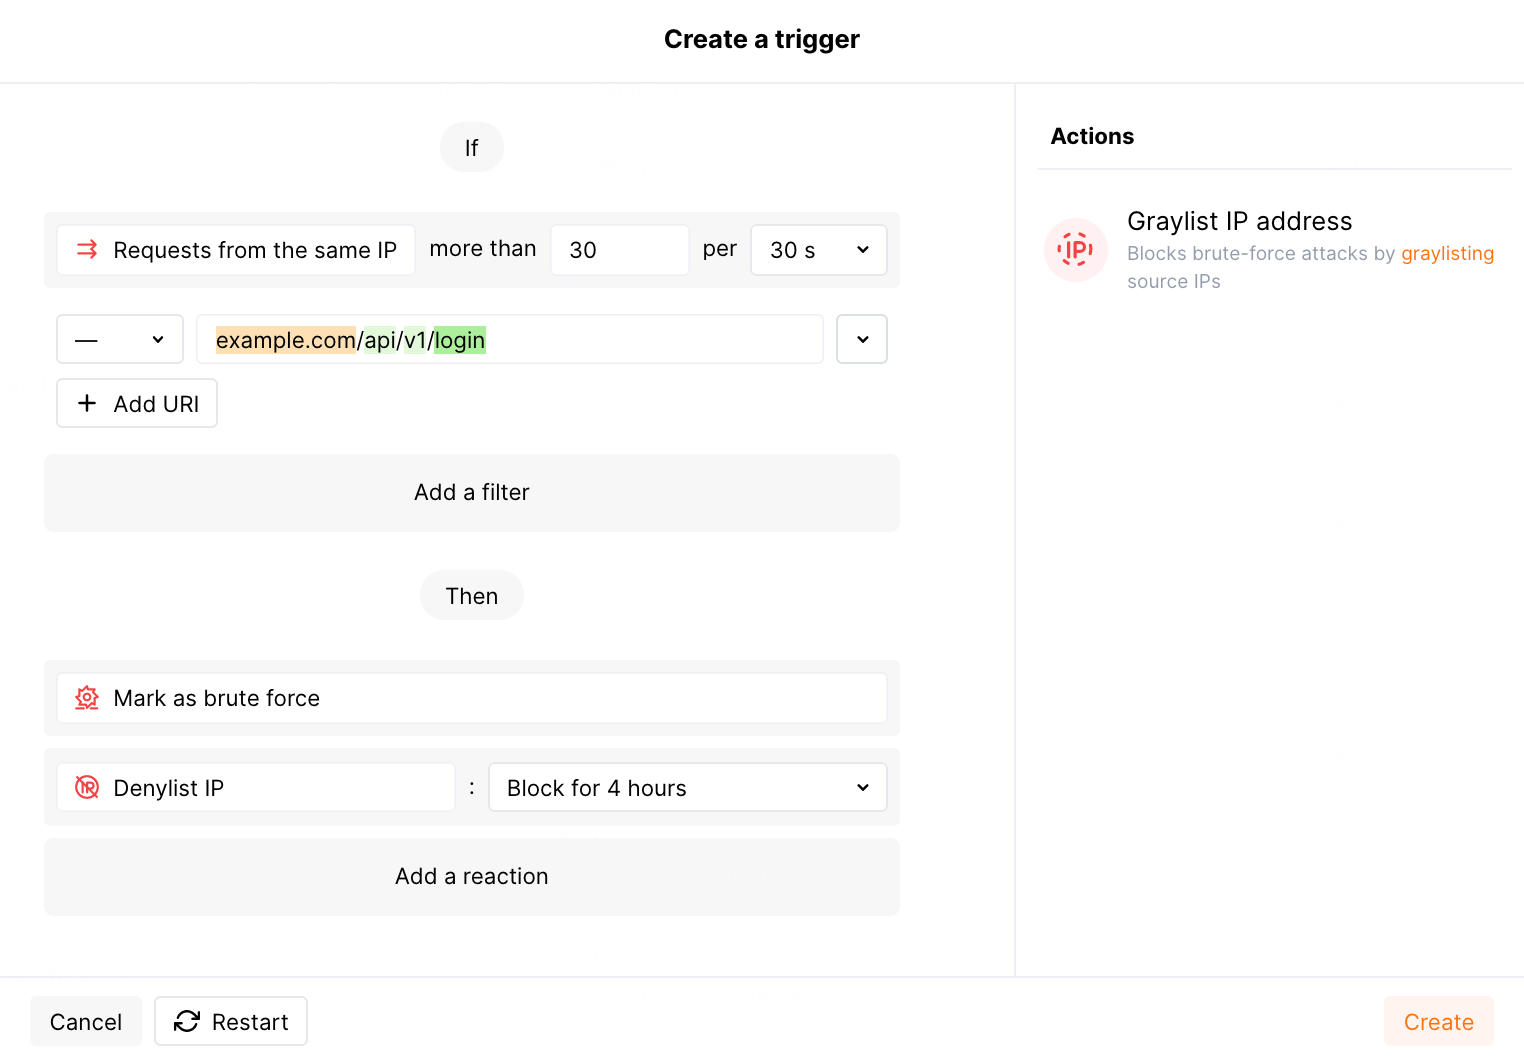 Brute force trigger example